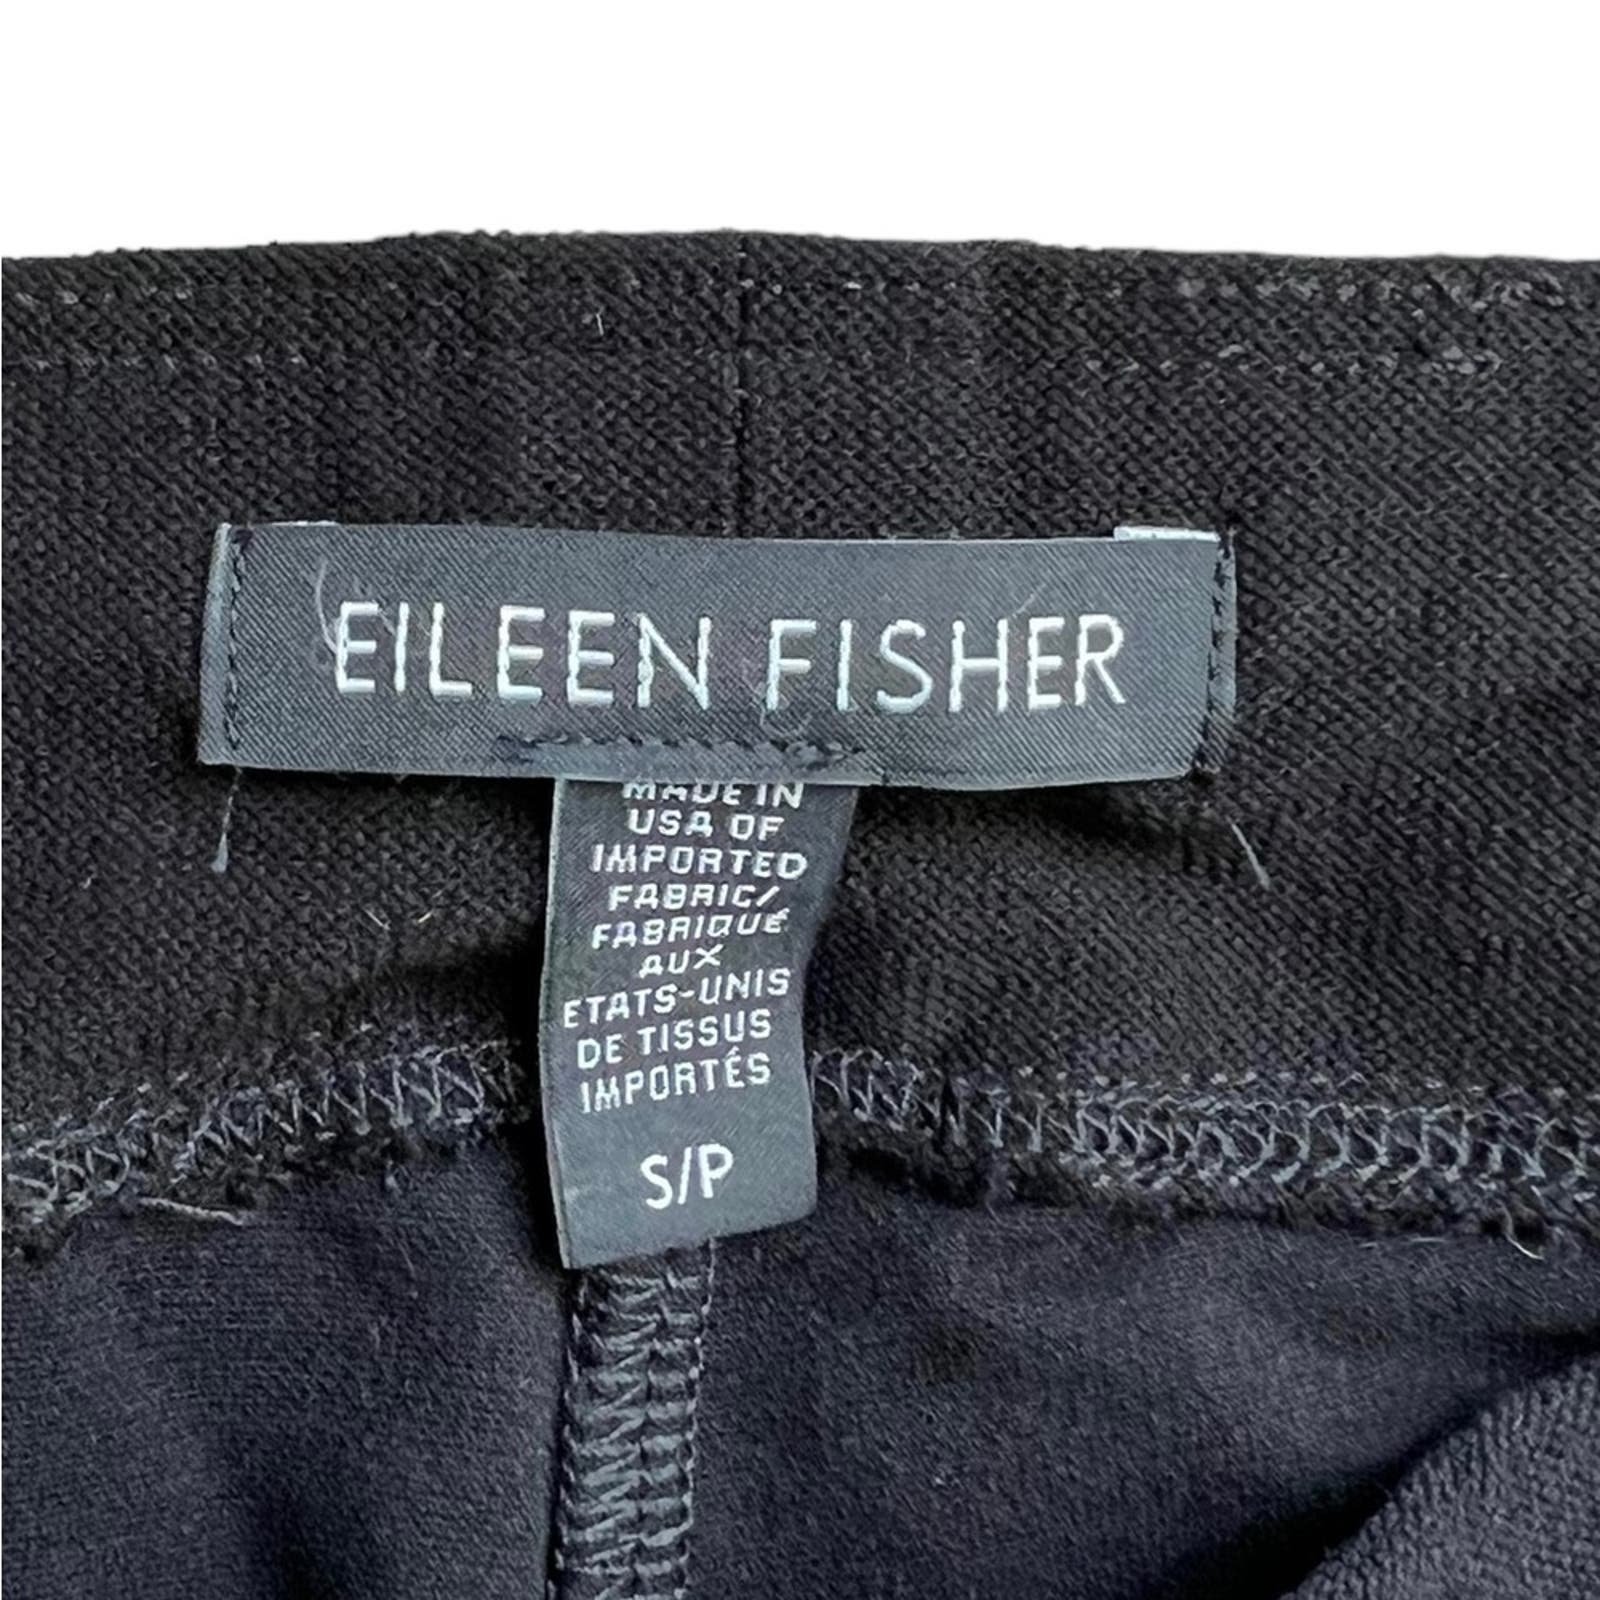 large selection Eileen Fisher Black Washable Stretch Crepe Pant size small iLRXGGjeW Online Shop